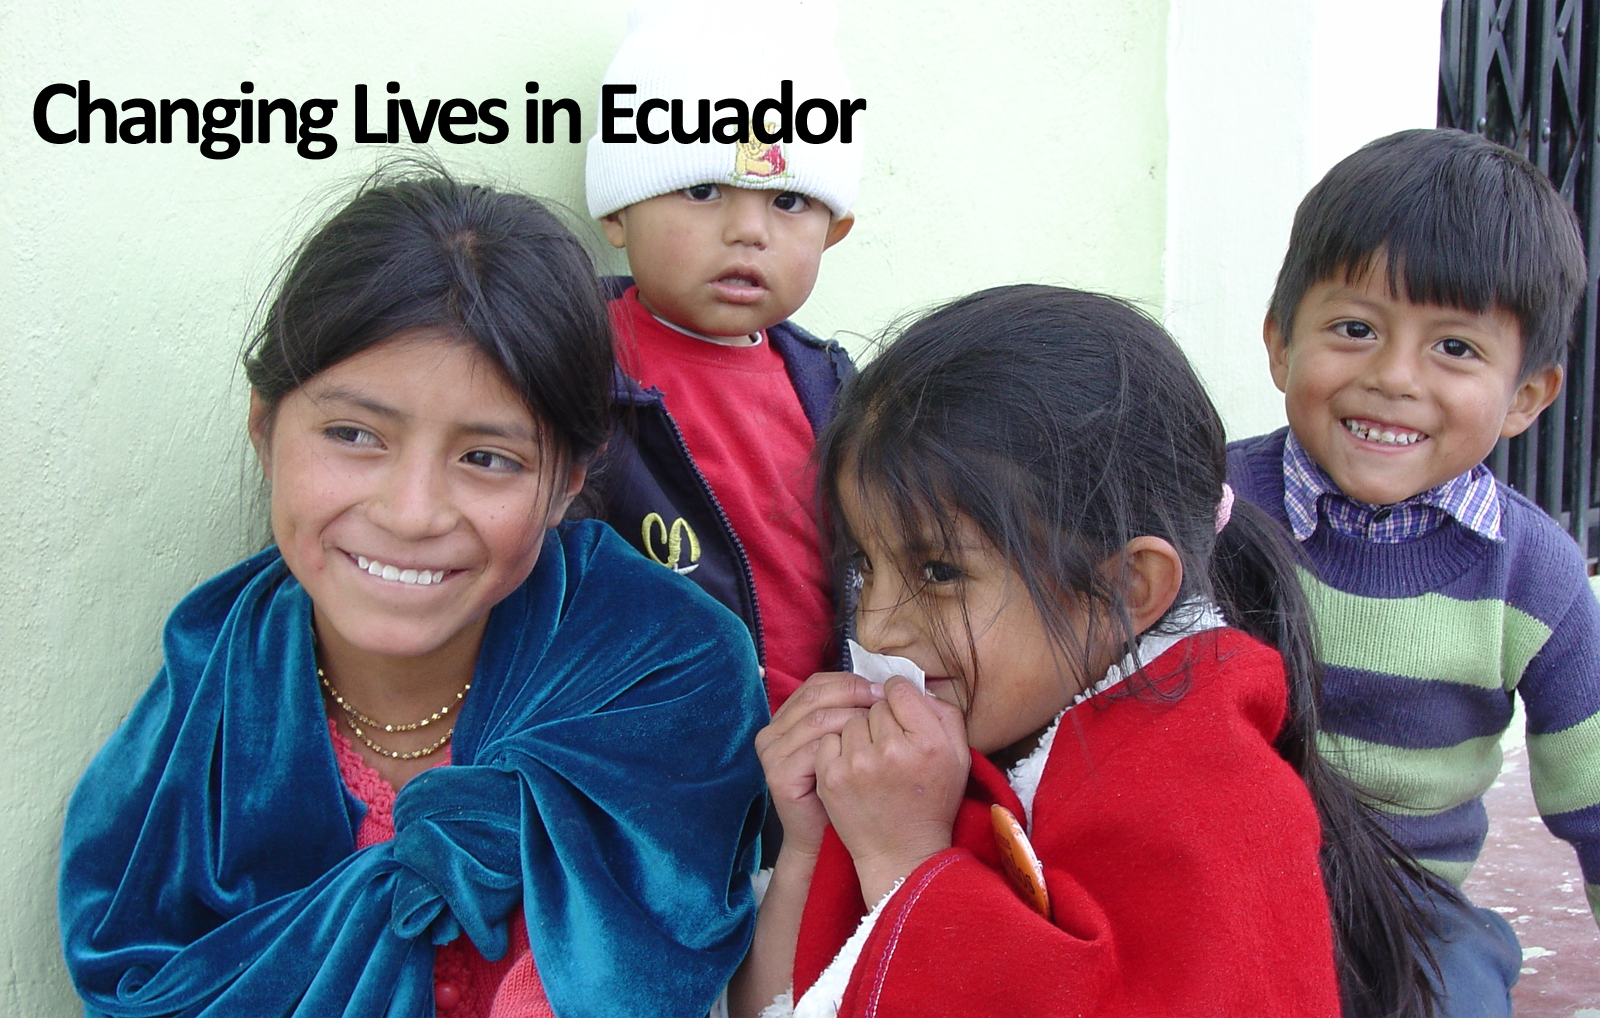 Changing lives in Ecuador